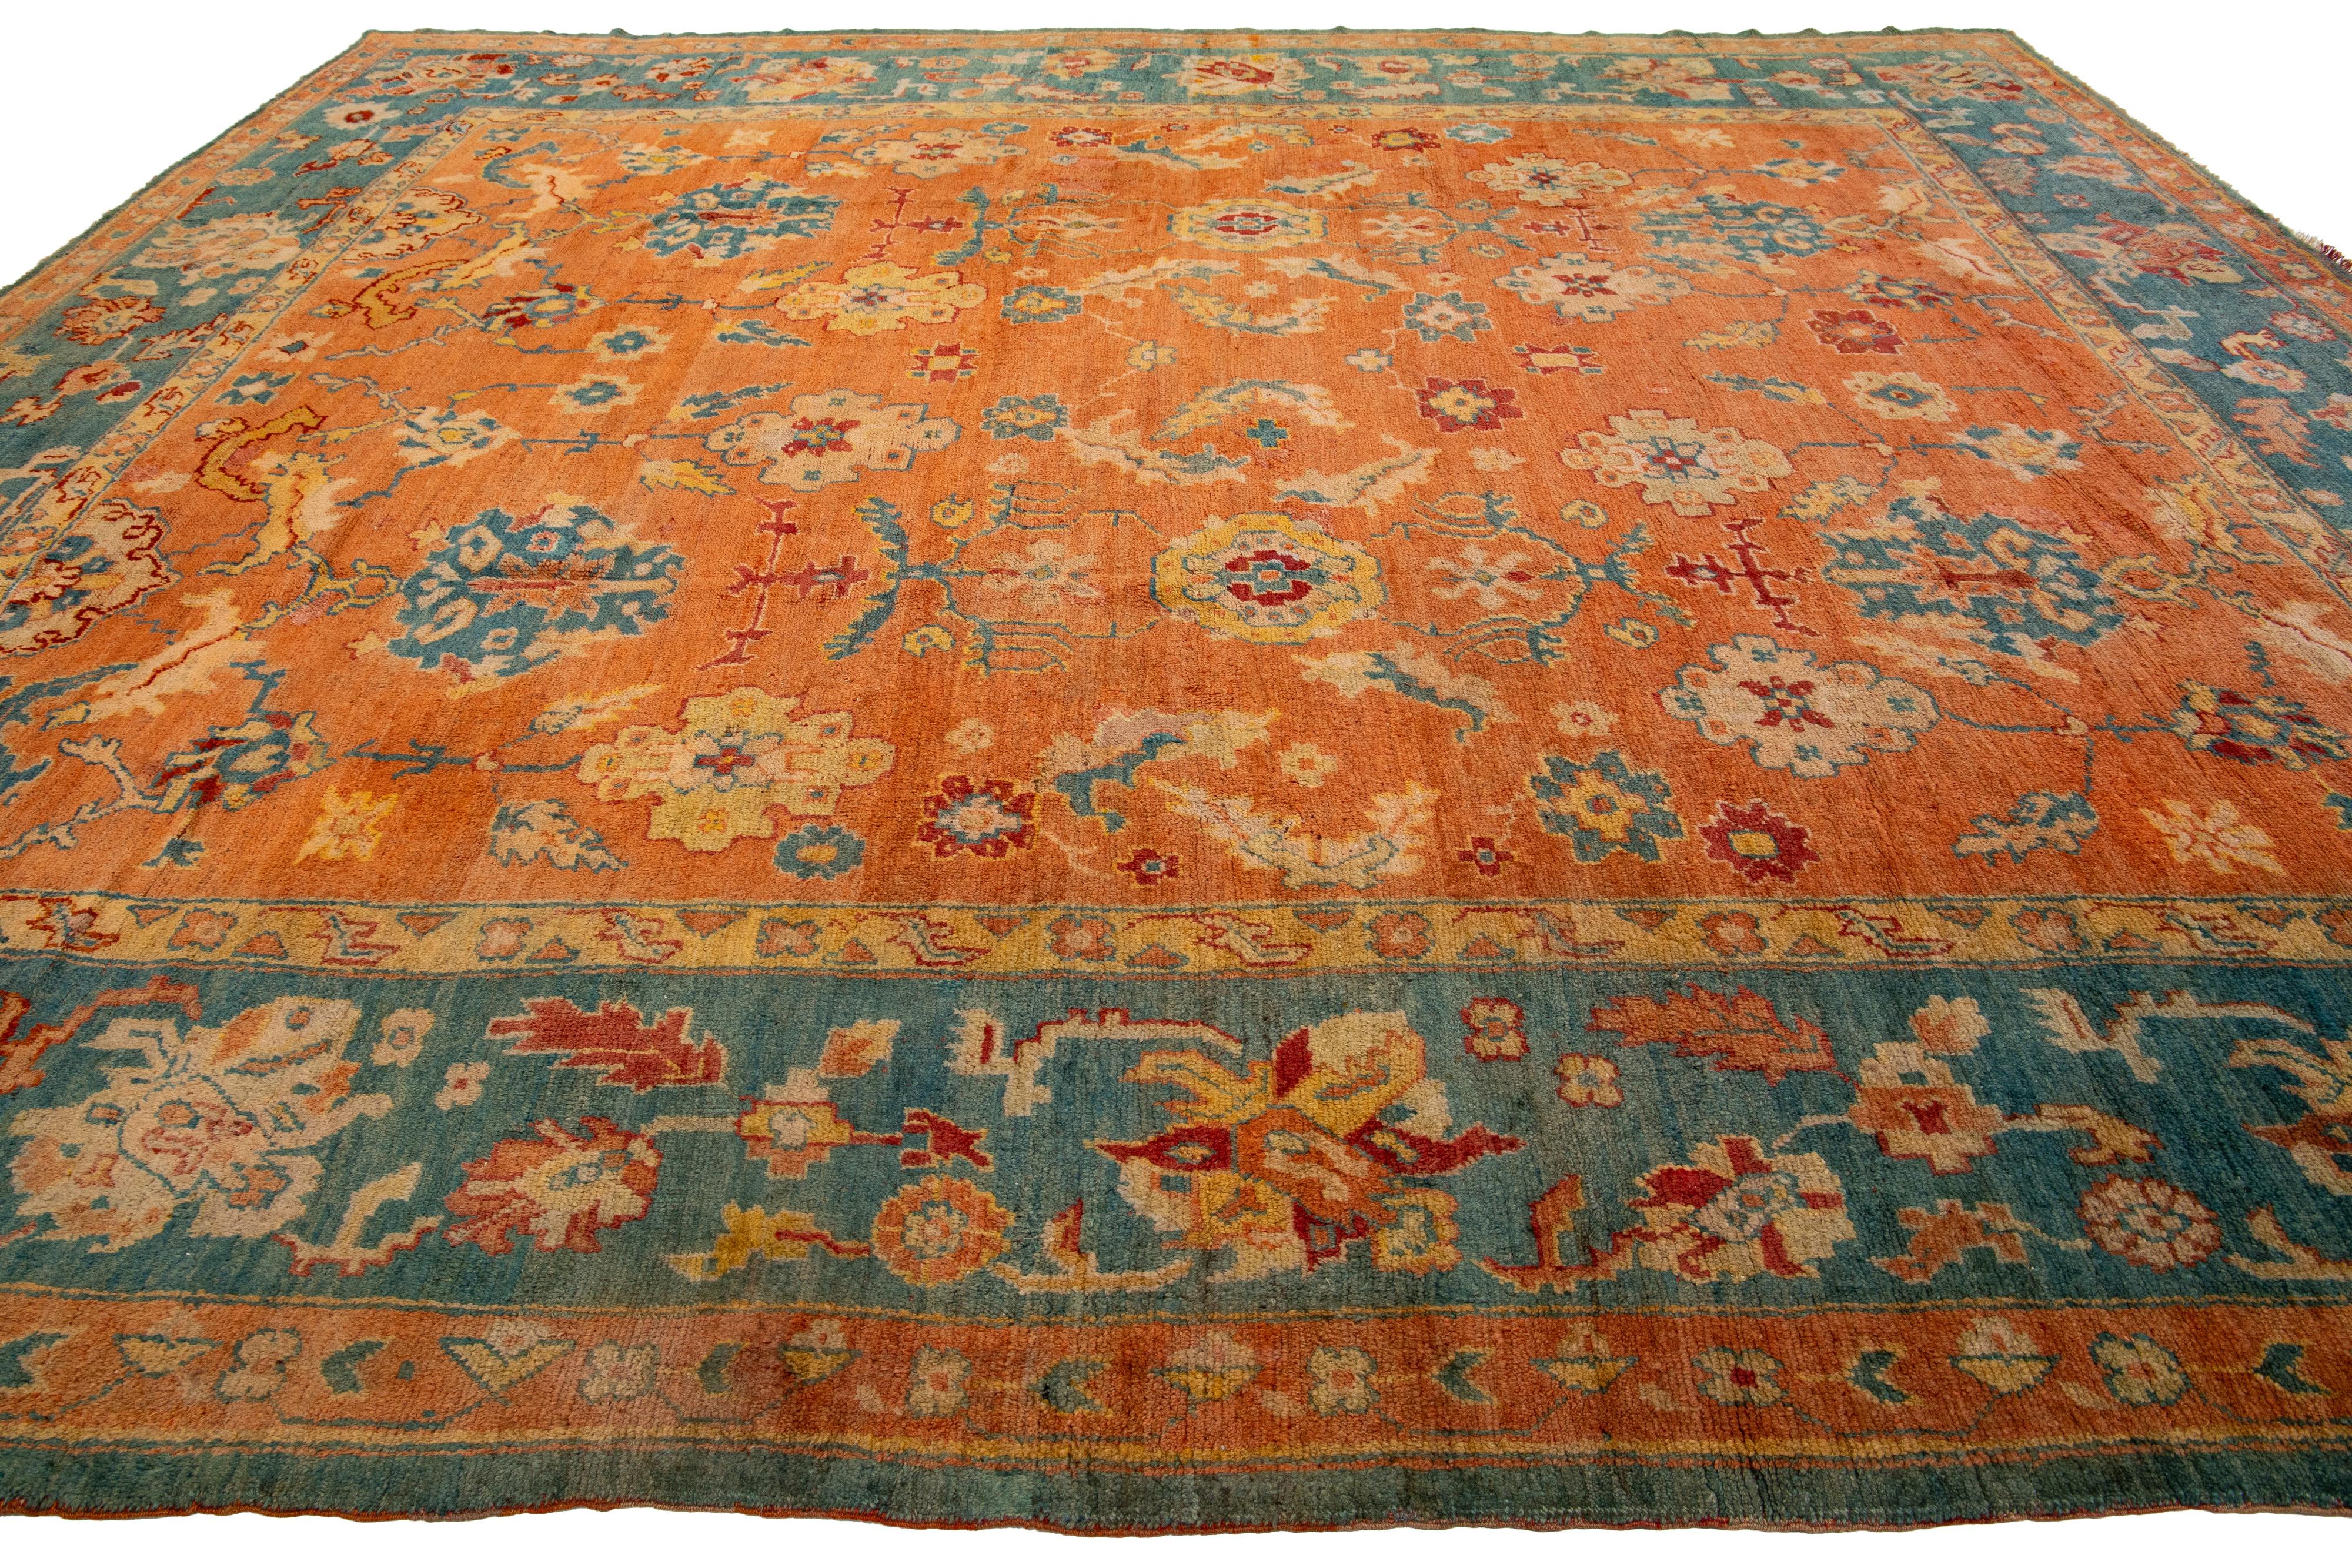 Orange and Blue Antique Turkish Oushak Wool Rug Handmade From the 1880s In Excellent Condition For Sale In Norwalk, CT